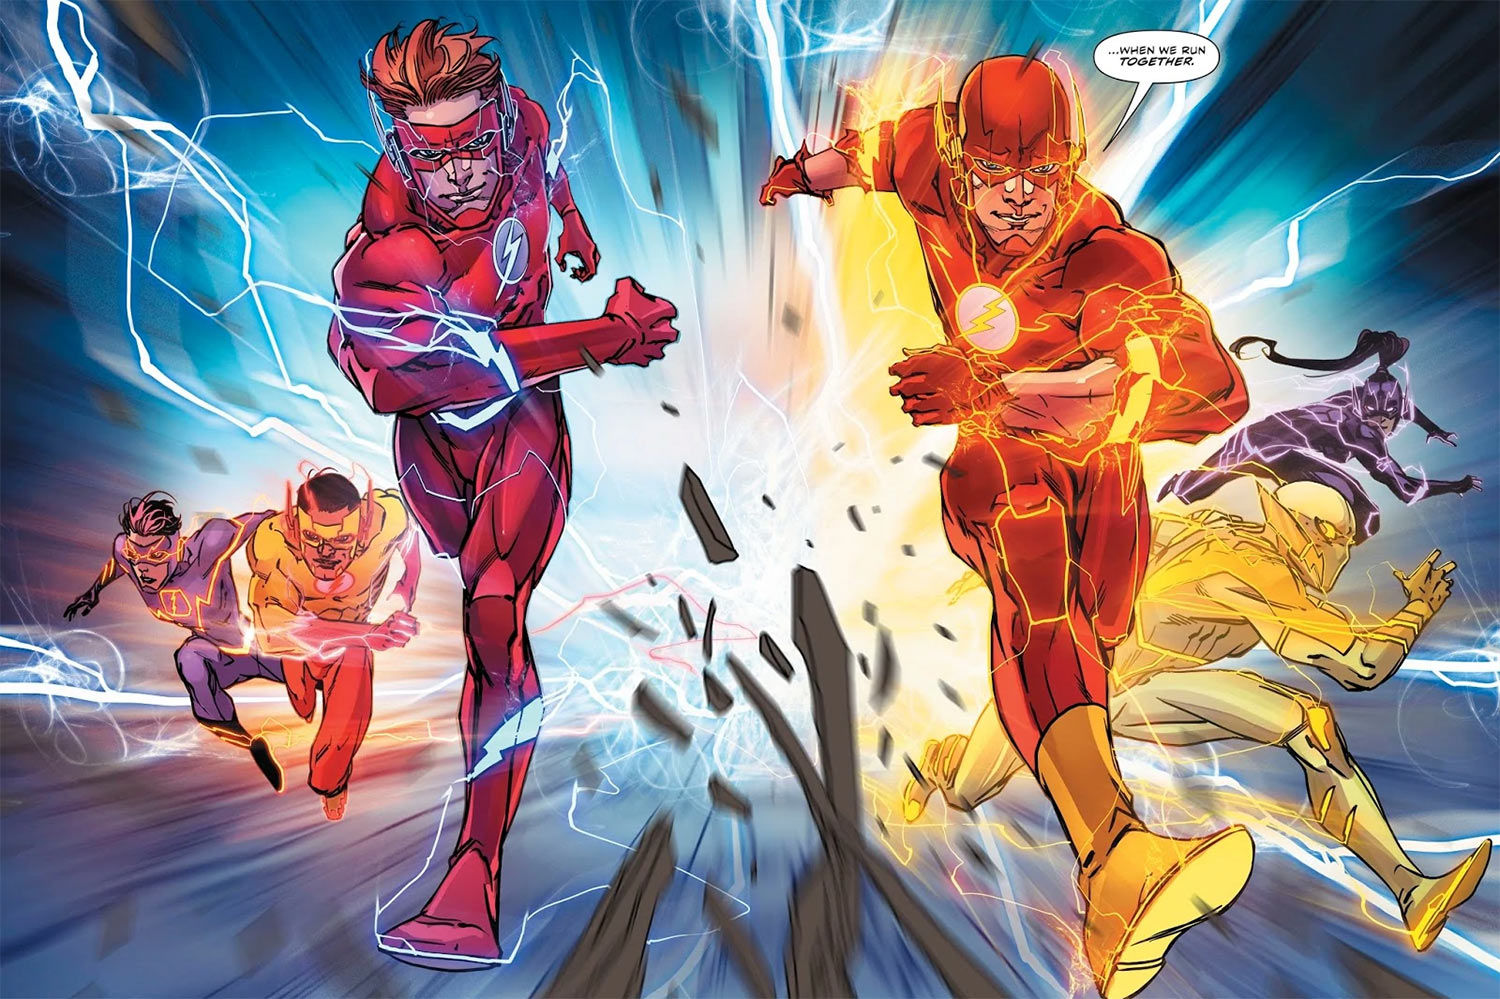 Greatest Flash Rogues Comics Ever Told